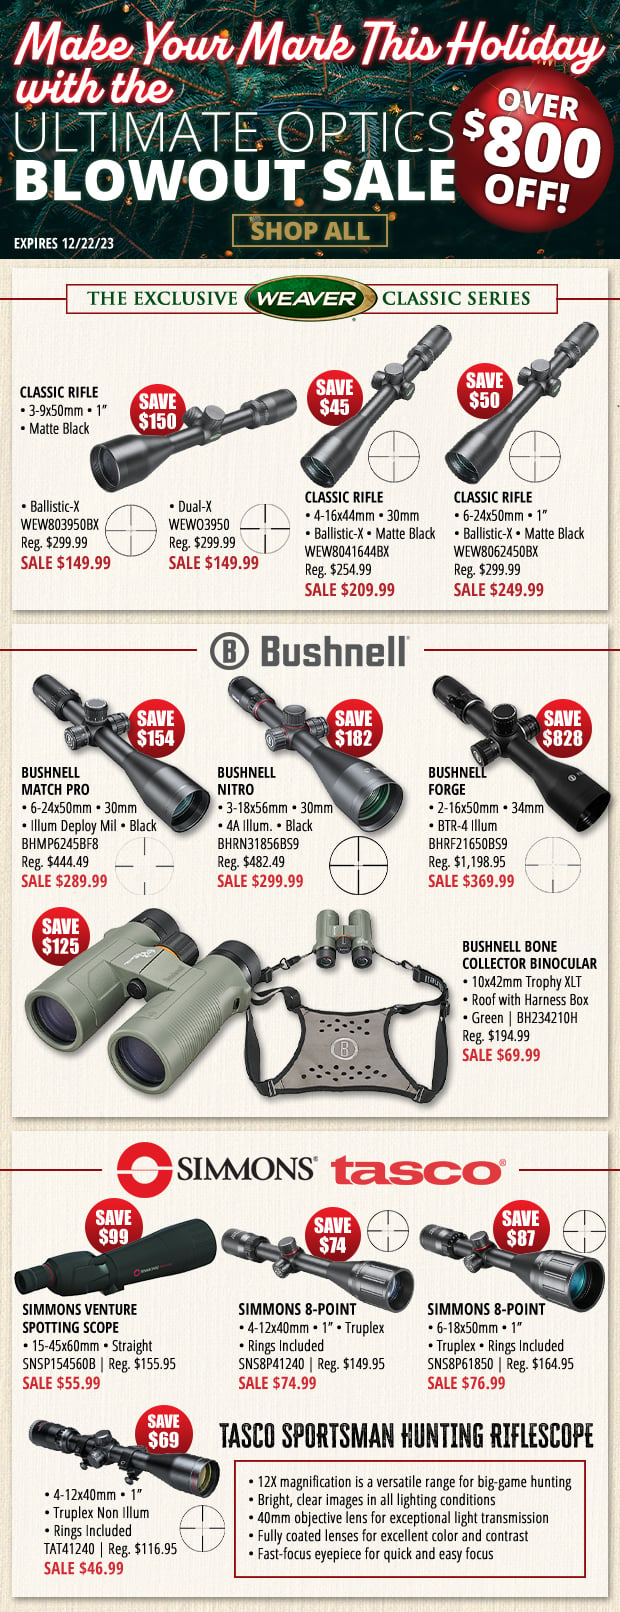 Over $800 Off with Our Ultimate Optics Blowout Sale!